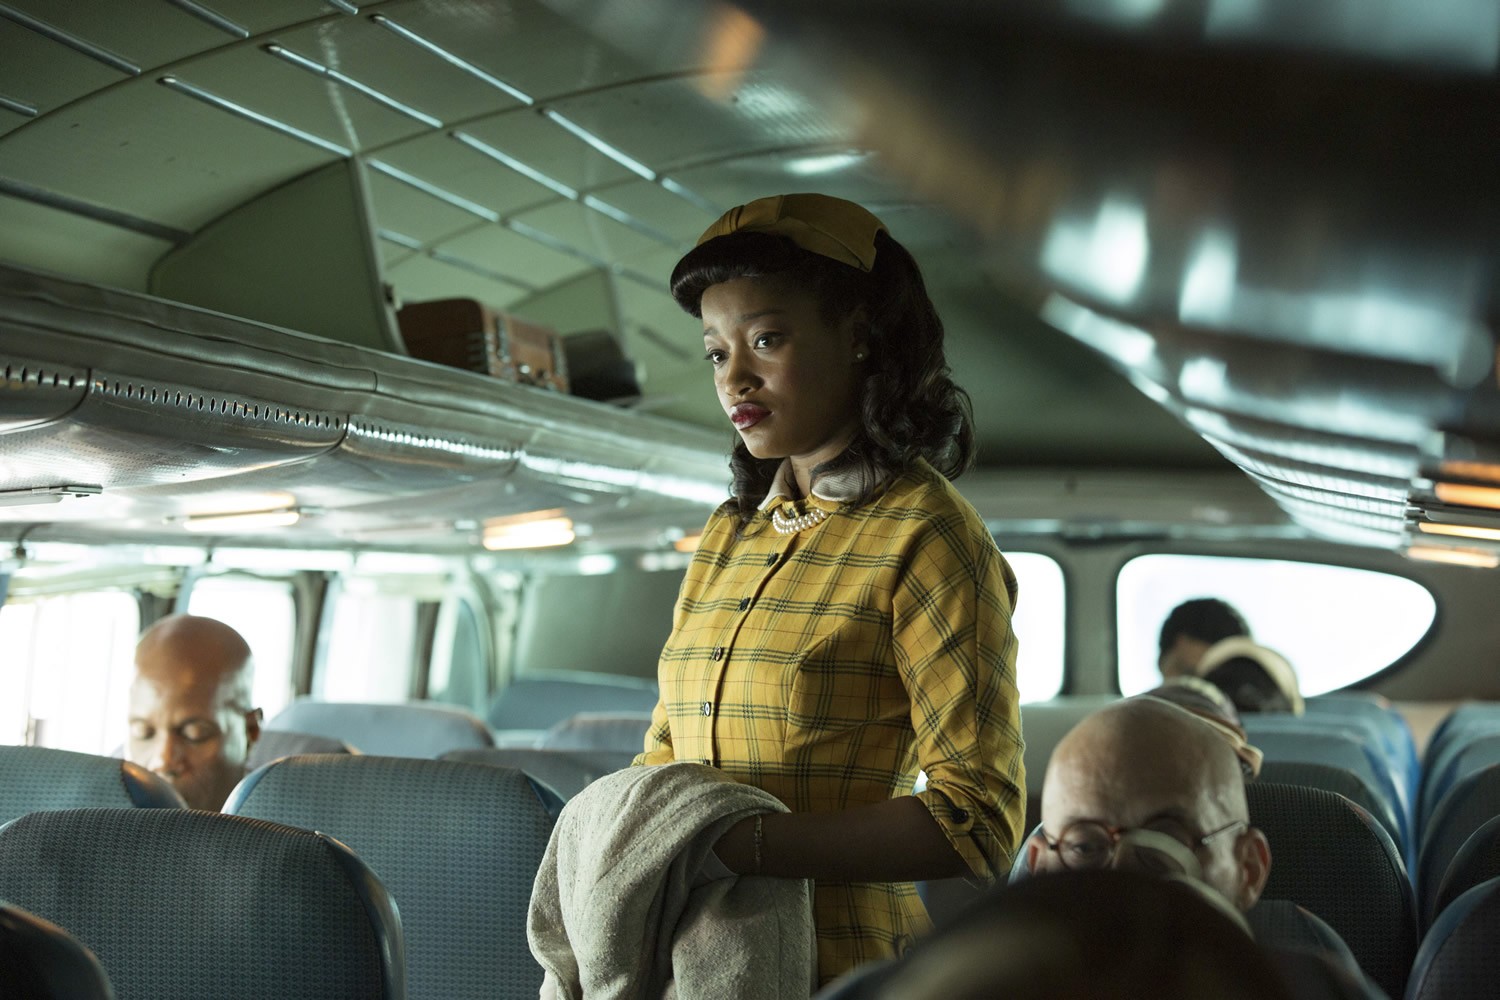 Keke Palmer stars as Thelma in Lifetime's The Trip to Bountiful (2014). Photo credit by Bob Mahoney.